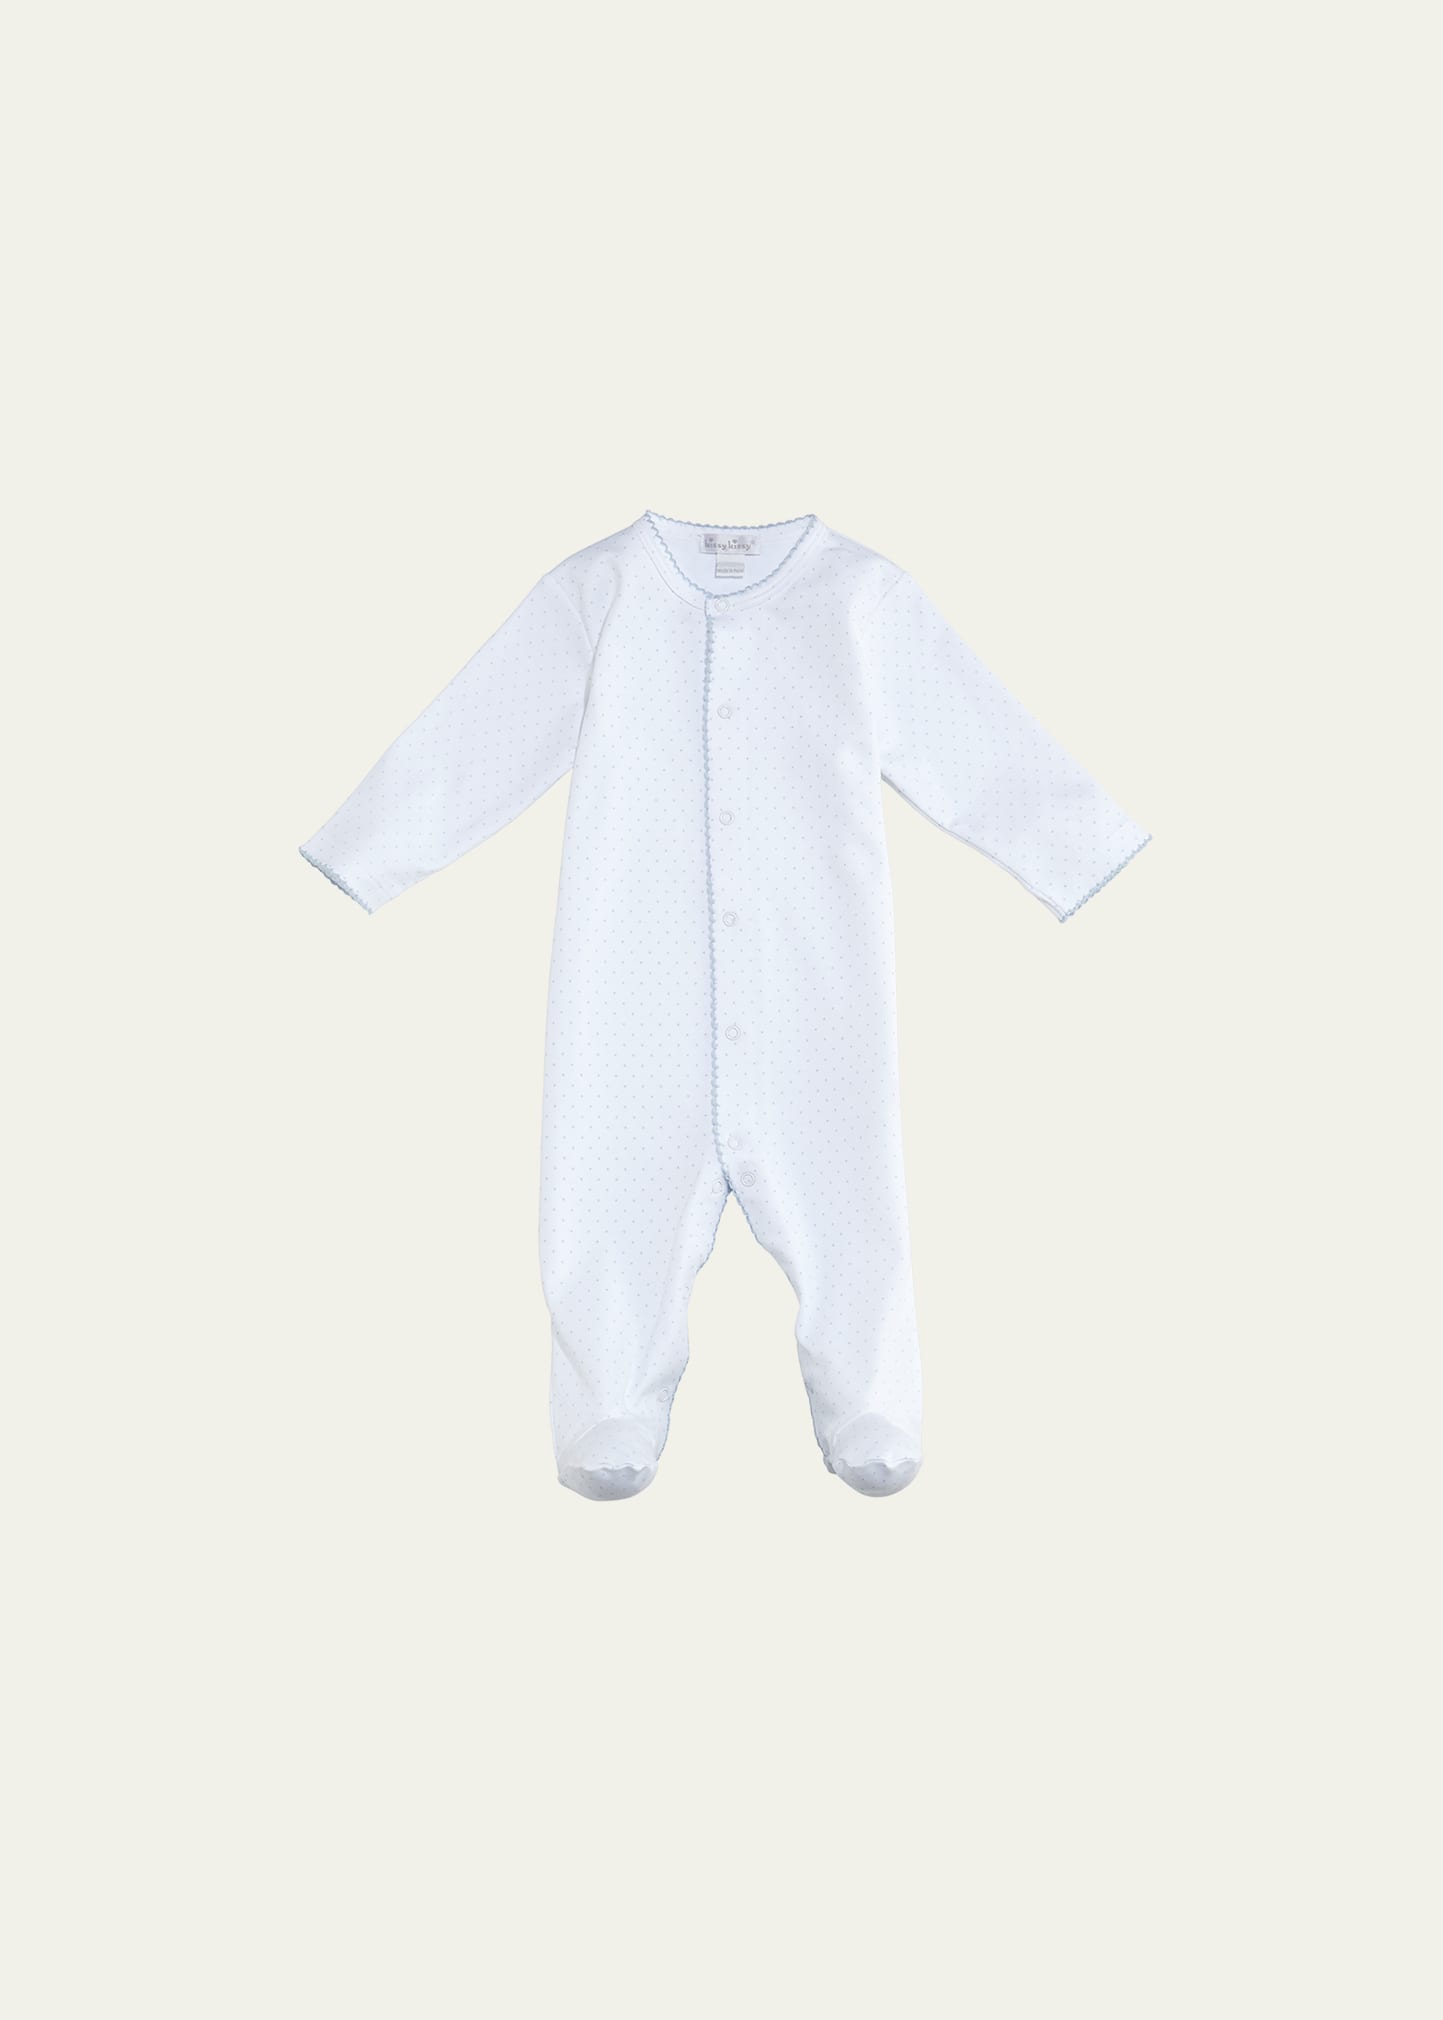 Polka-Dot Footie Playsuit, Size 0-9 Months